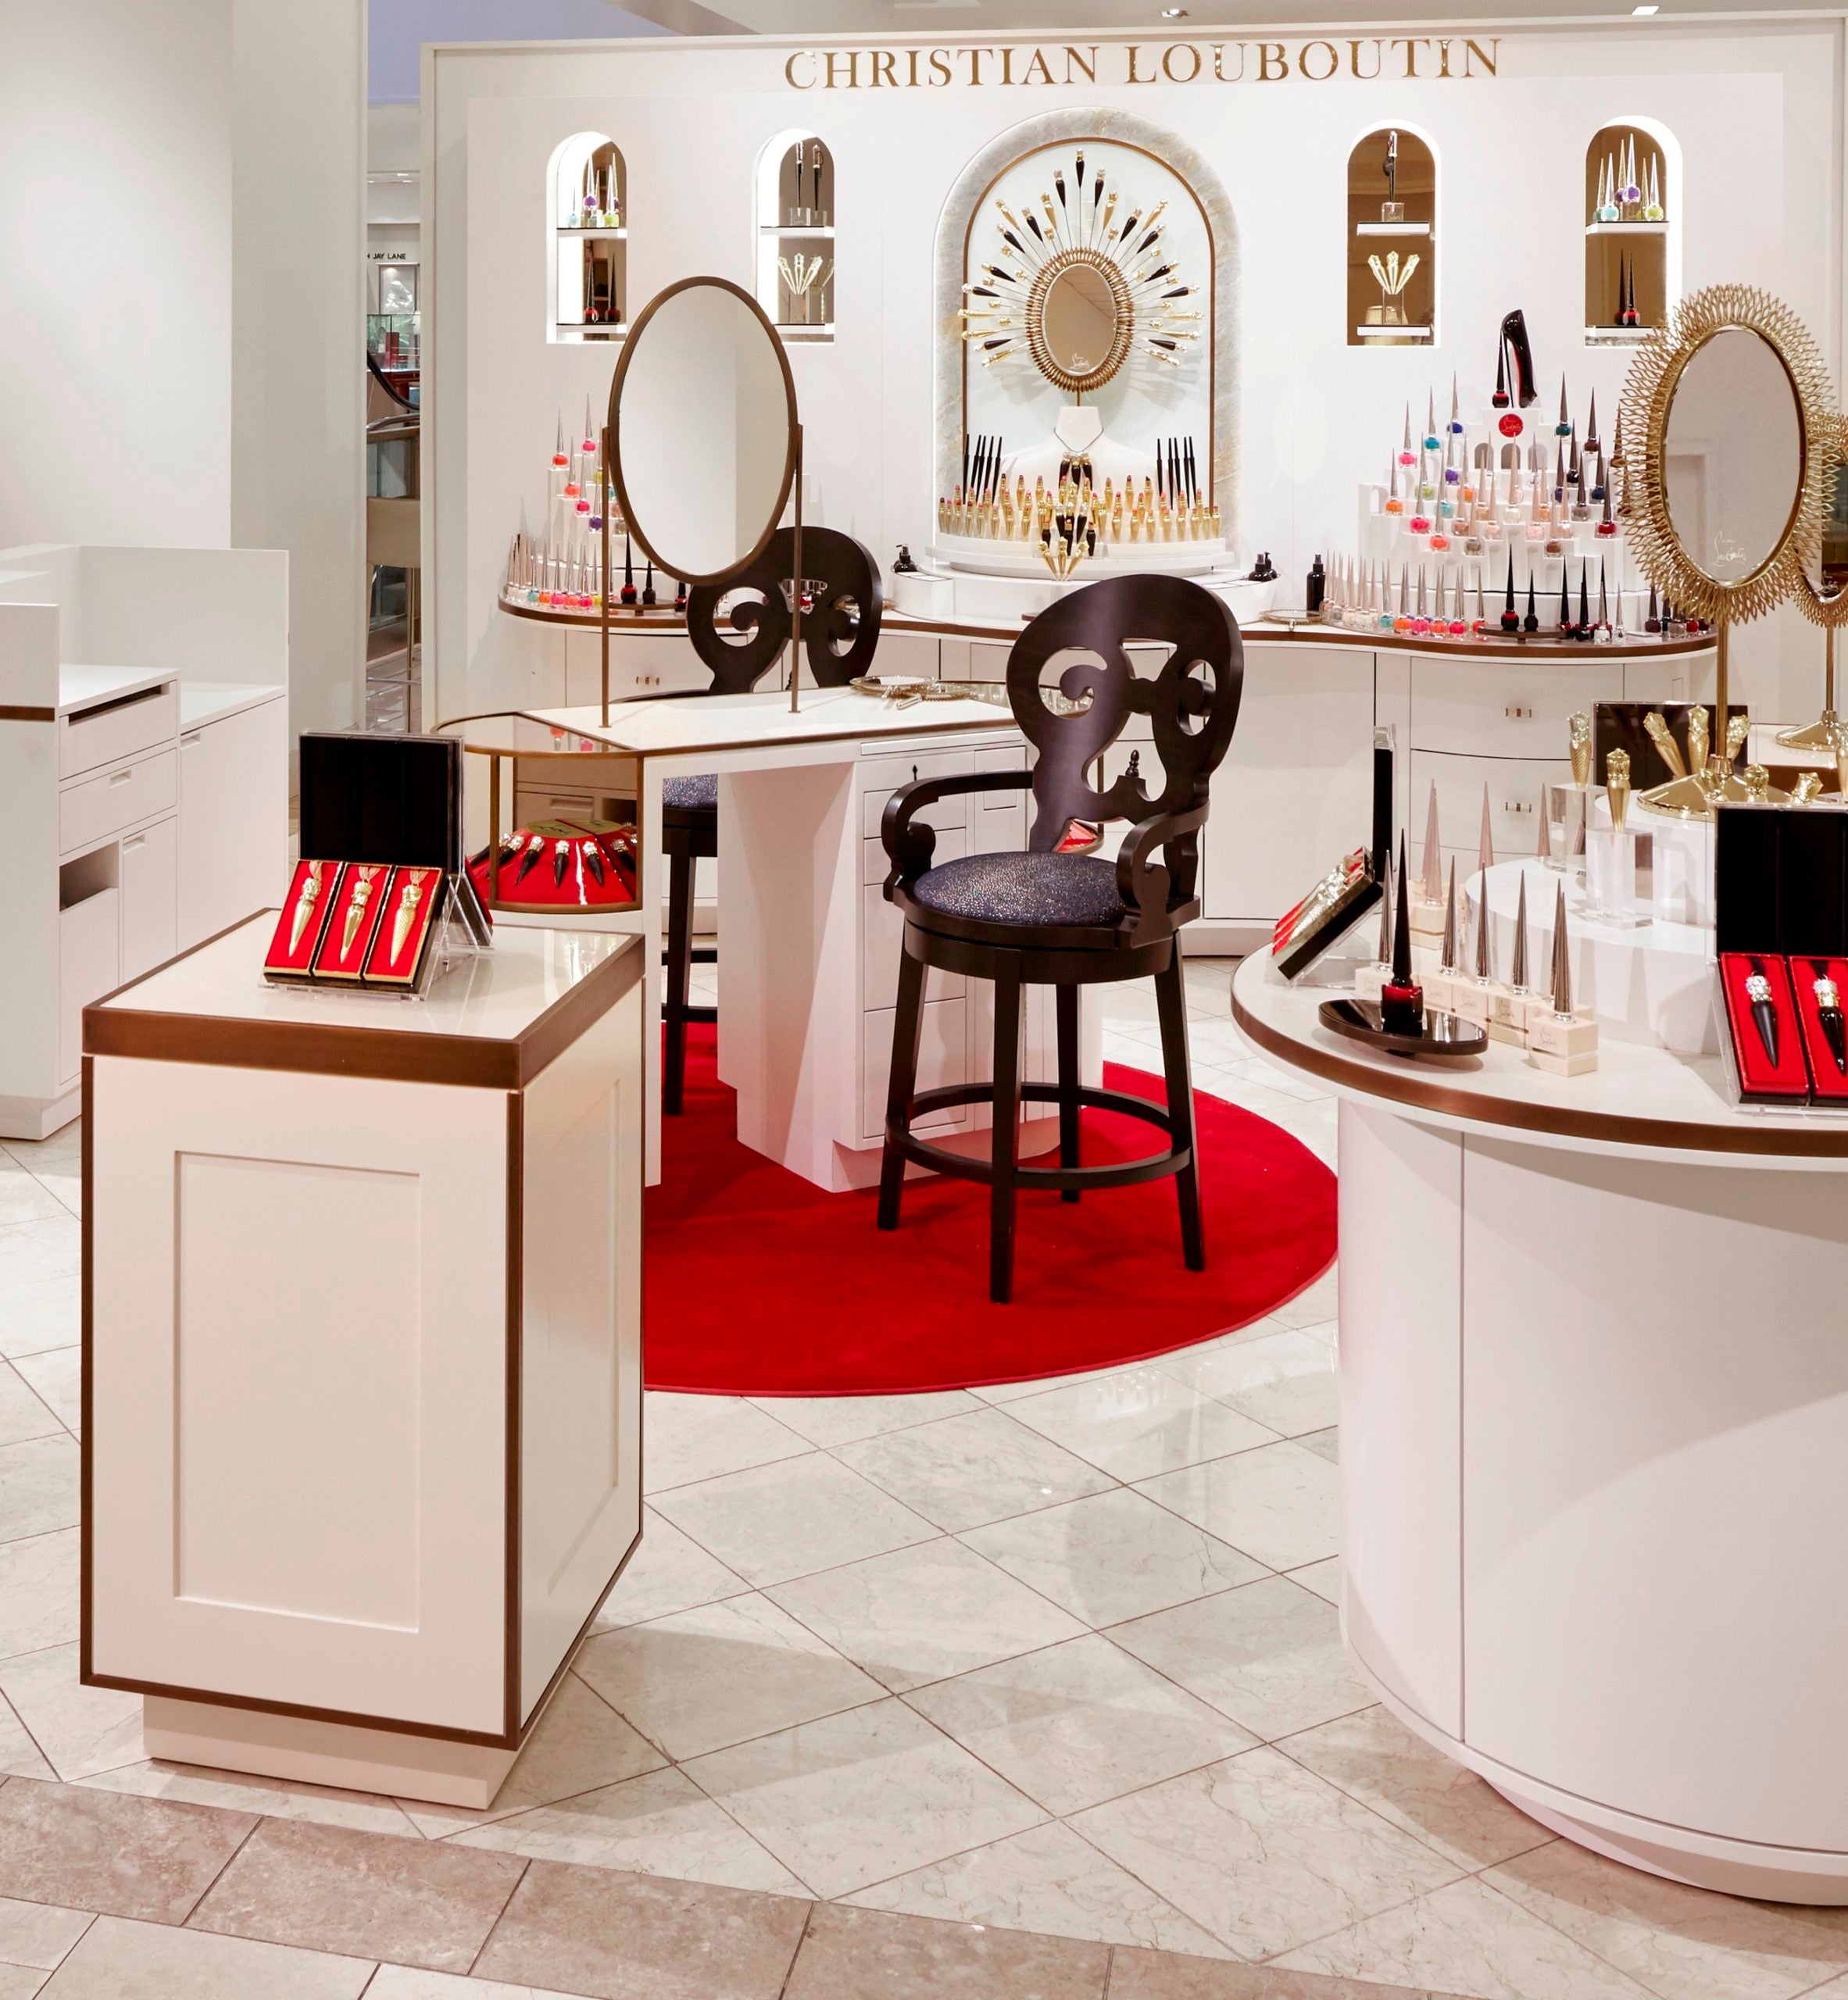 Store, &, Retail, News, Review, Christian, Louboutin, Beauty, Launches, Boutiques, For, Makeup, Lipstick, Nail, Polish, 2016